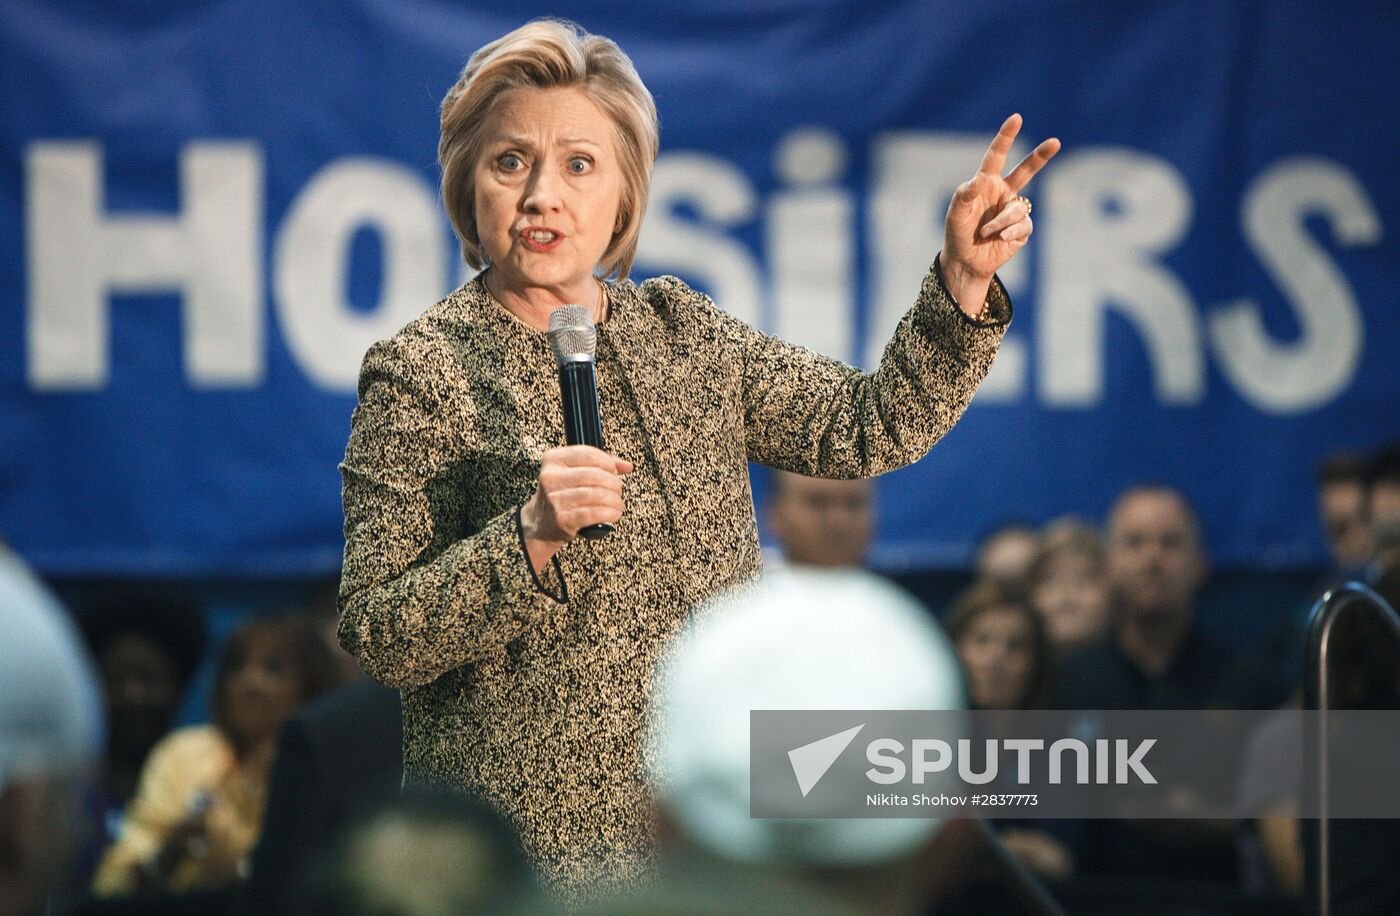 U.S. Democratic presidential candidate Hillary Clinton in Indiana